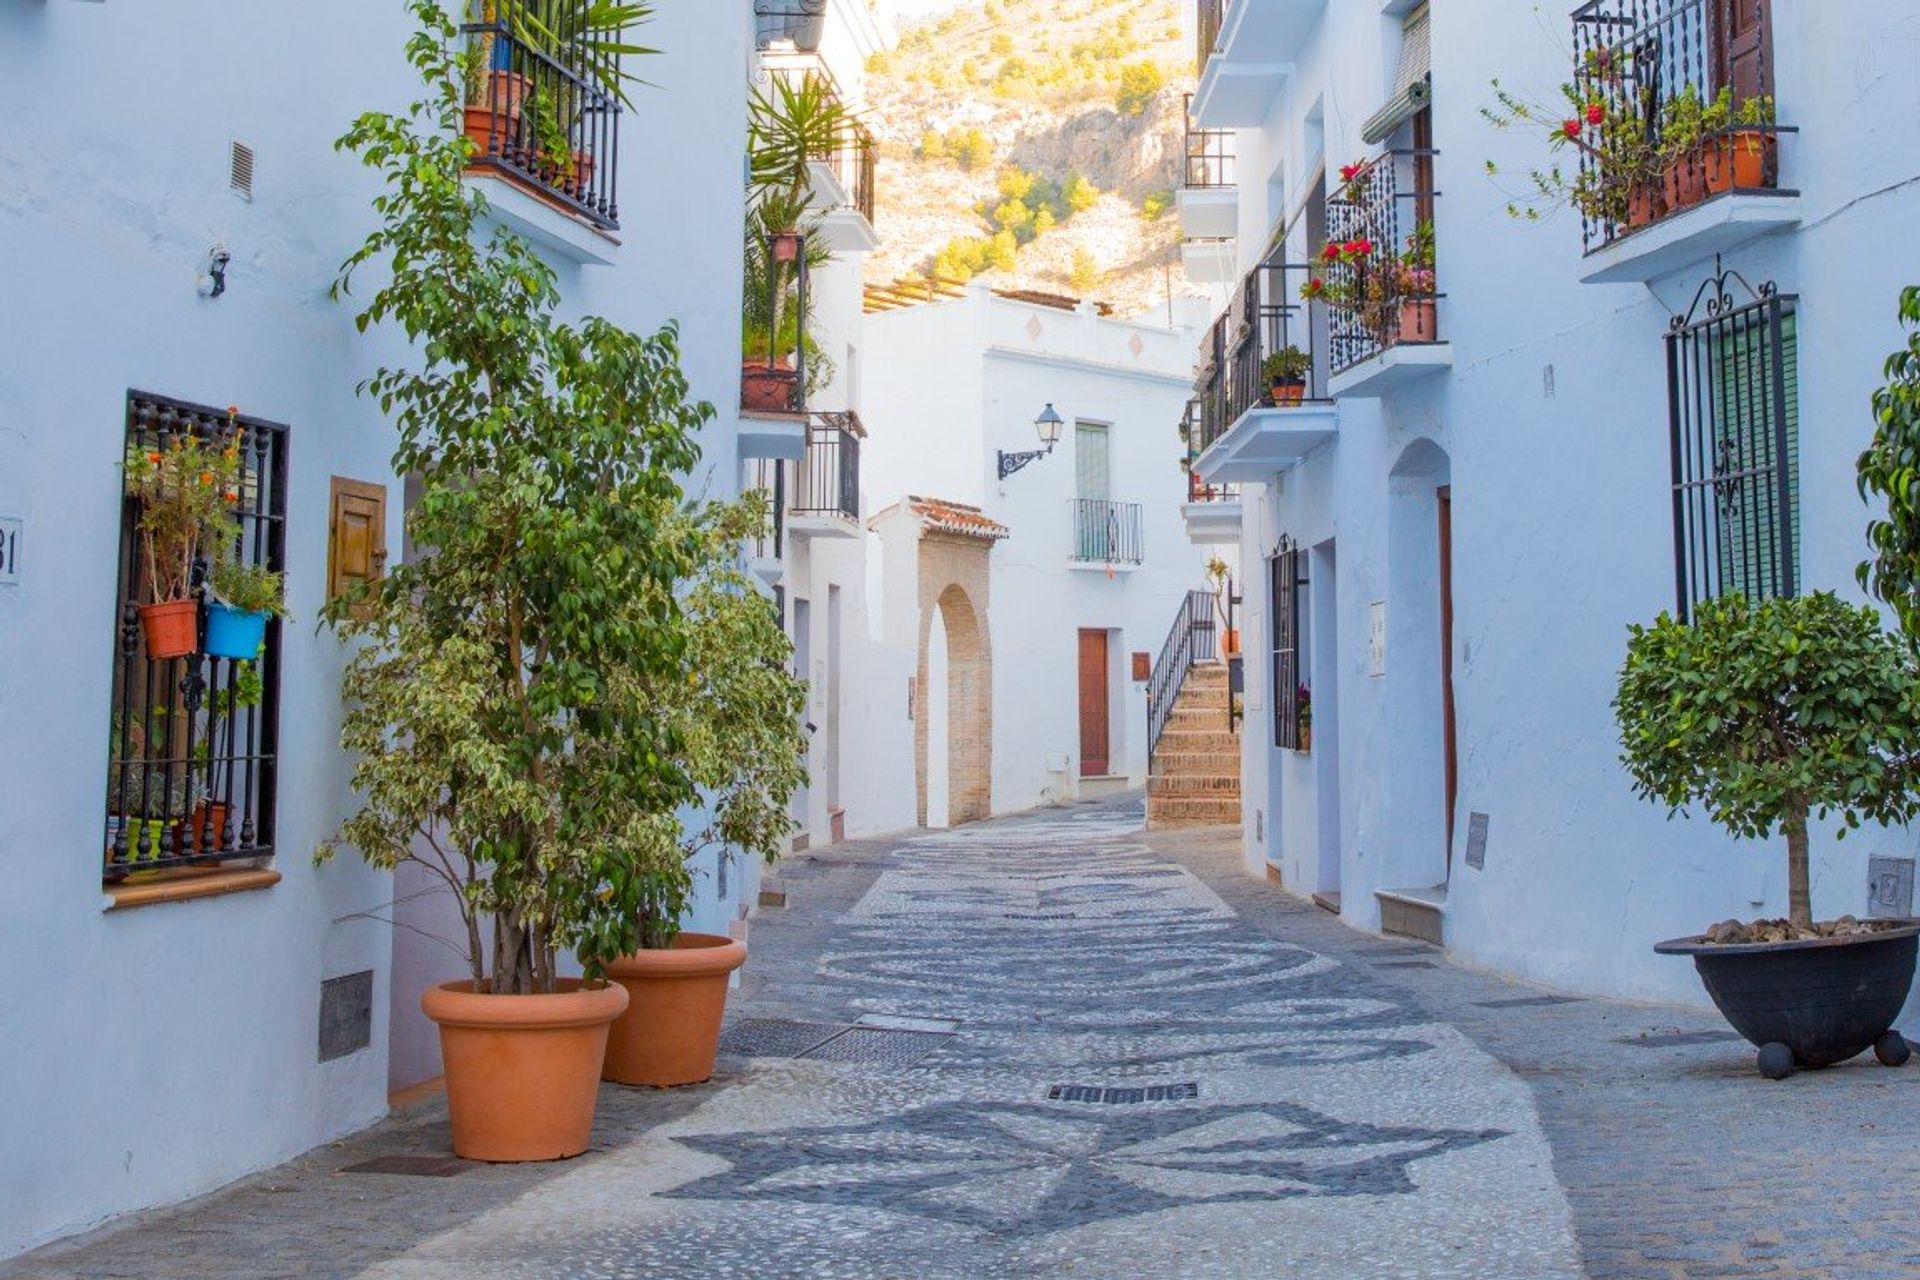 It's not hard to see why Frigiliana was voted as 'the prettiest village in Andalucia'